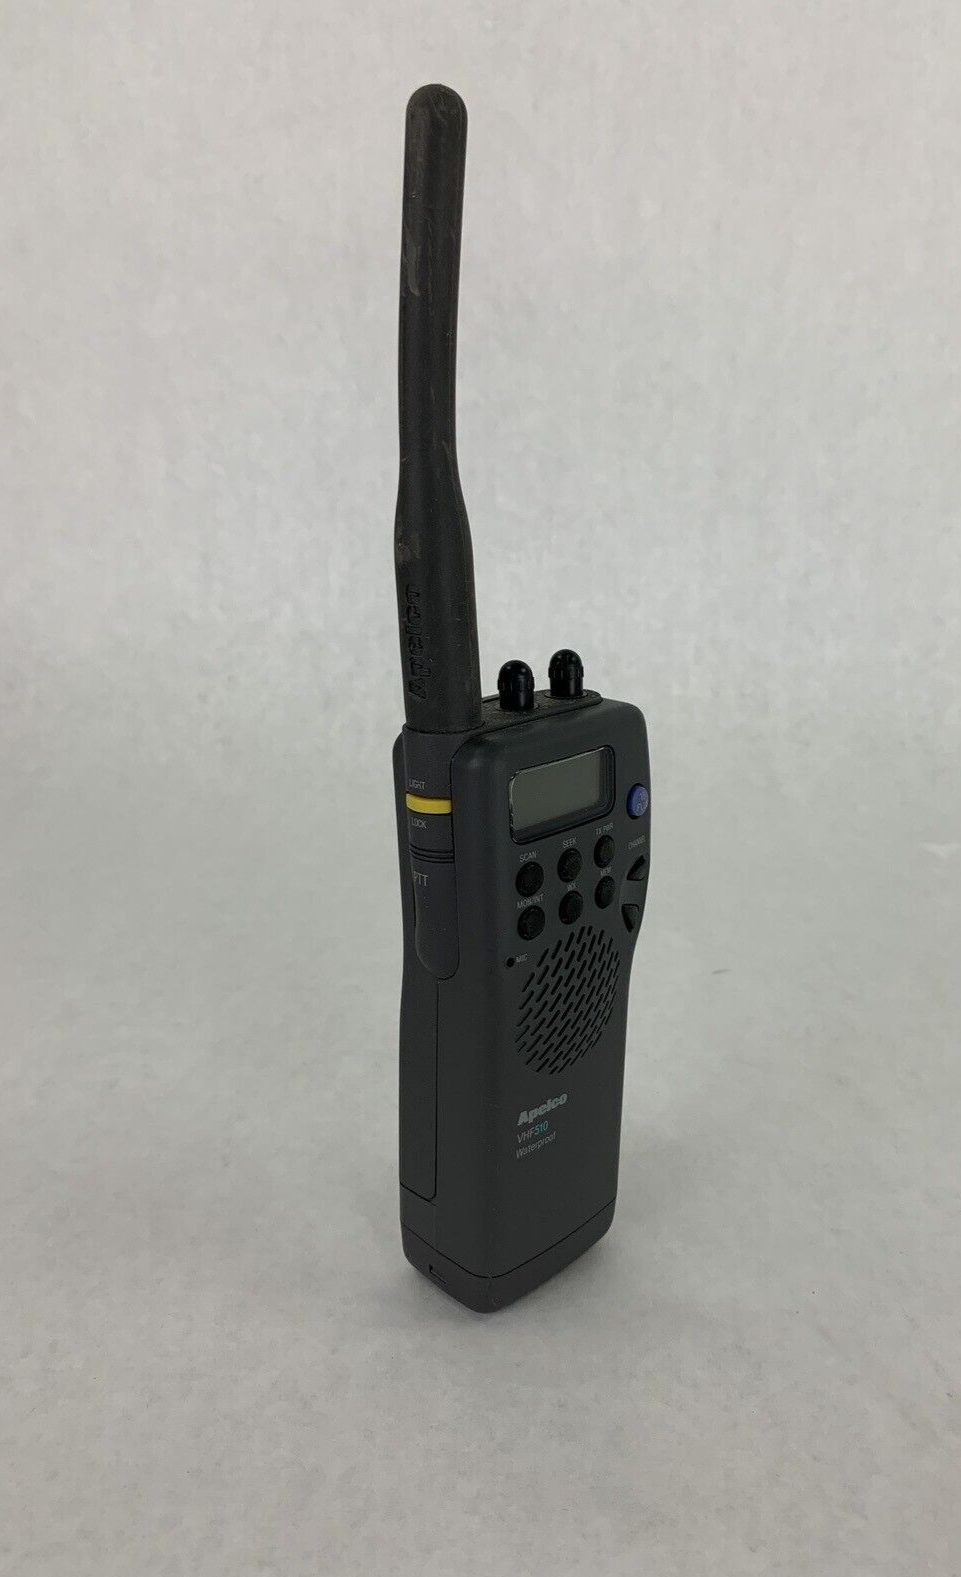 Apelco VHF510 Marine Radio VHF with Charging Dock For Parts and Repair